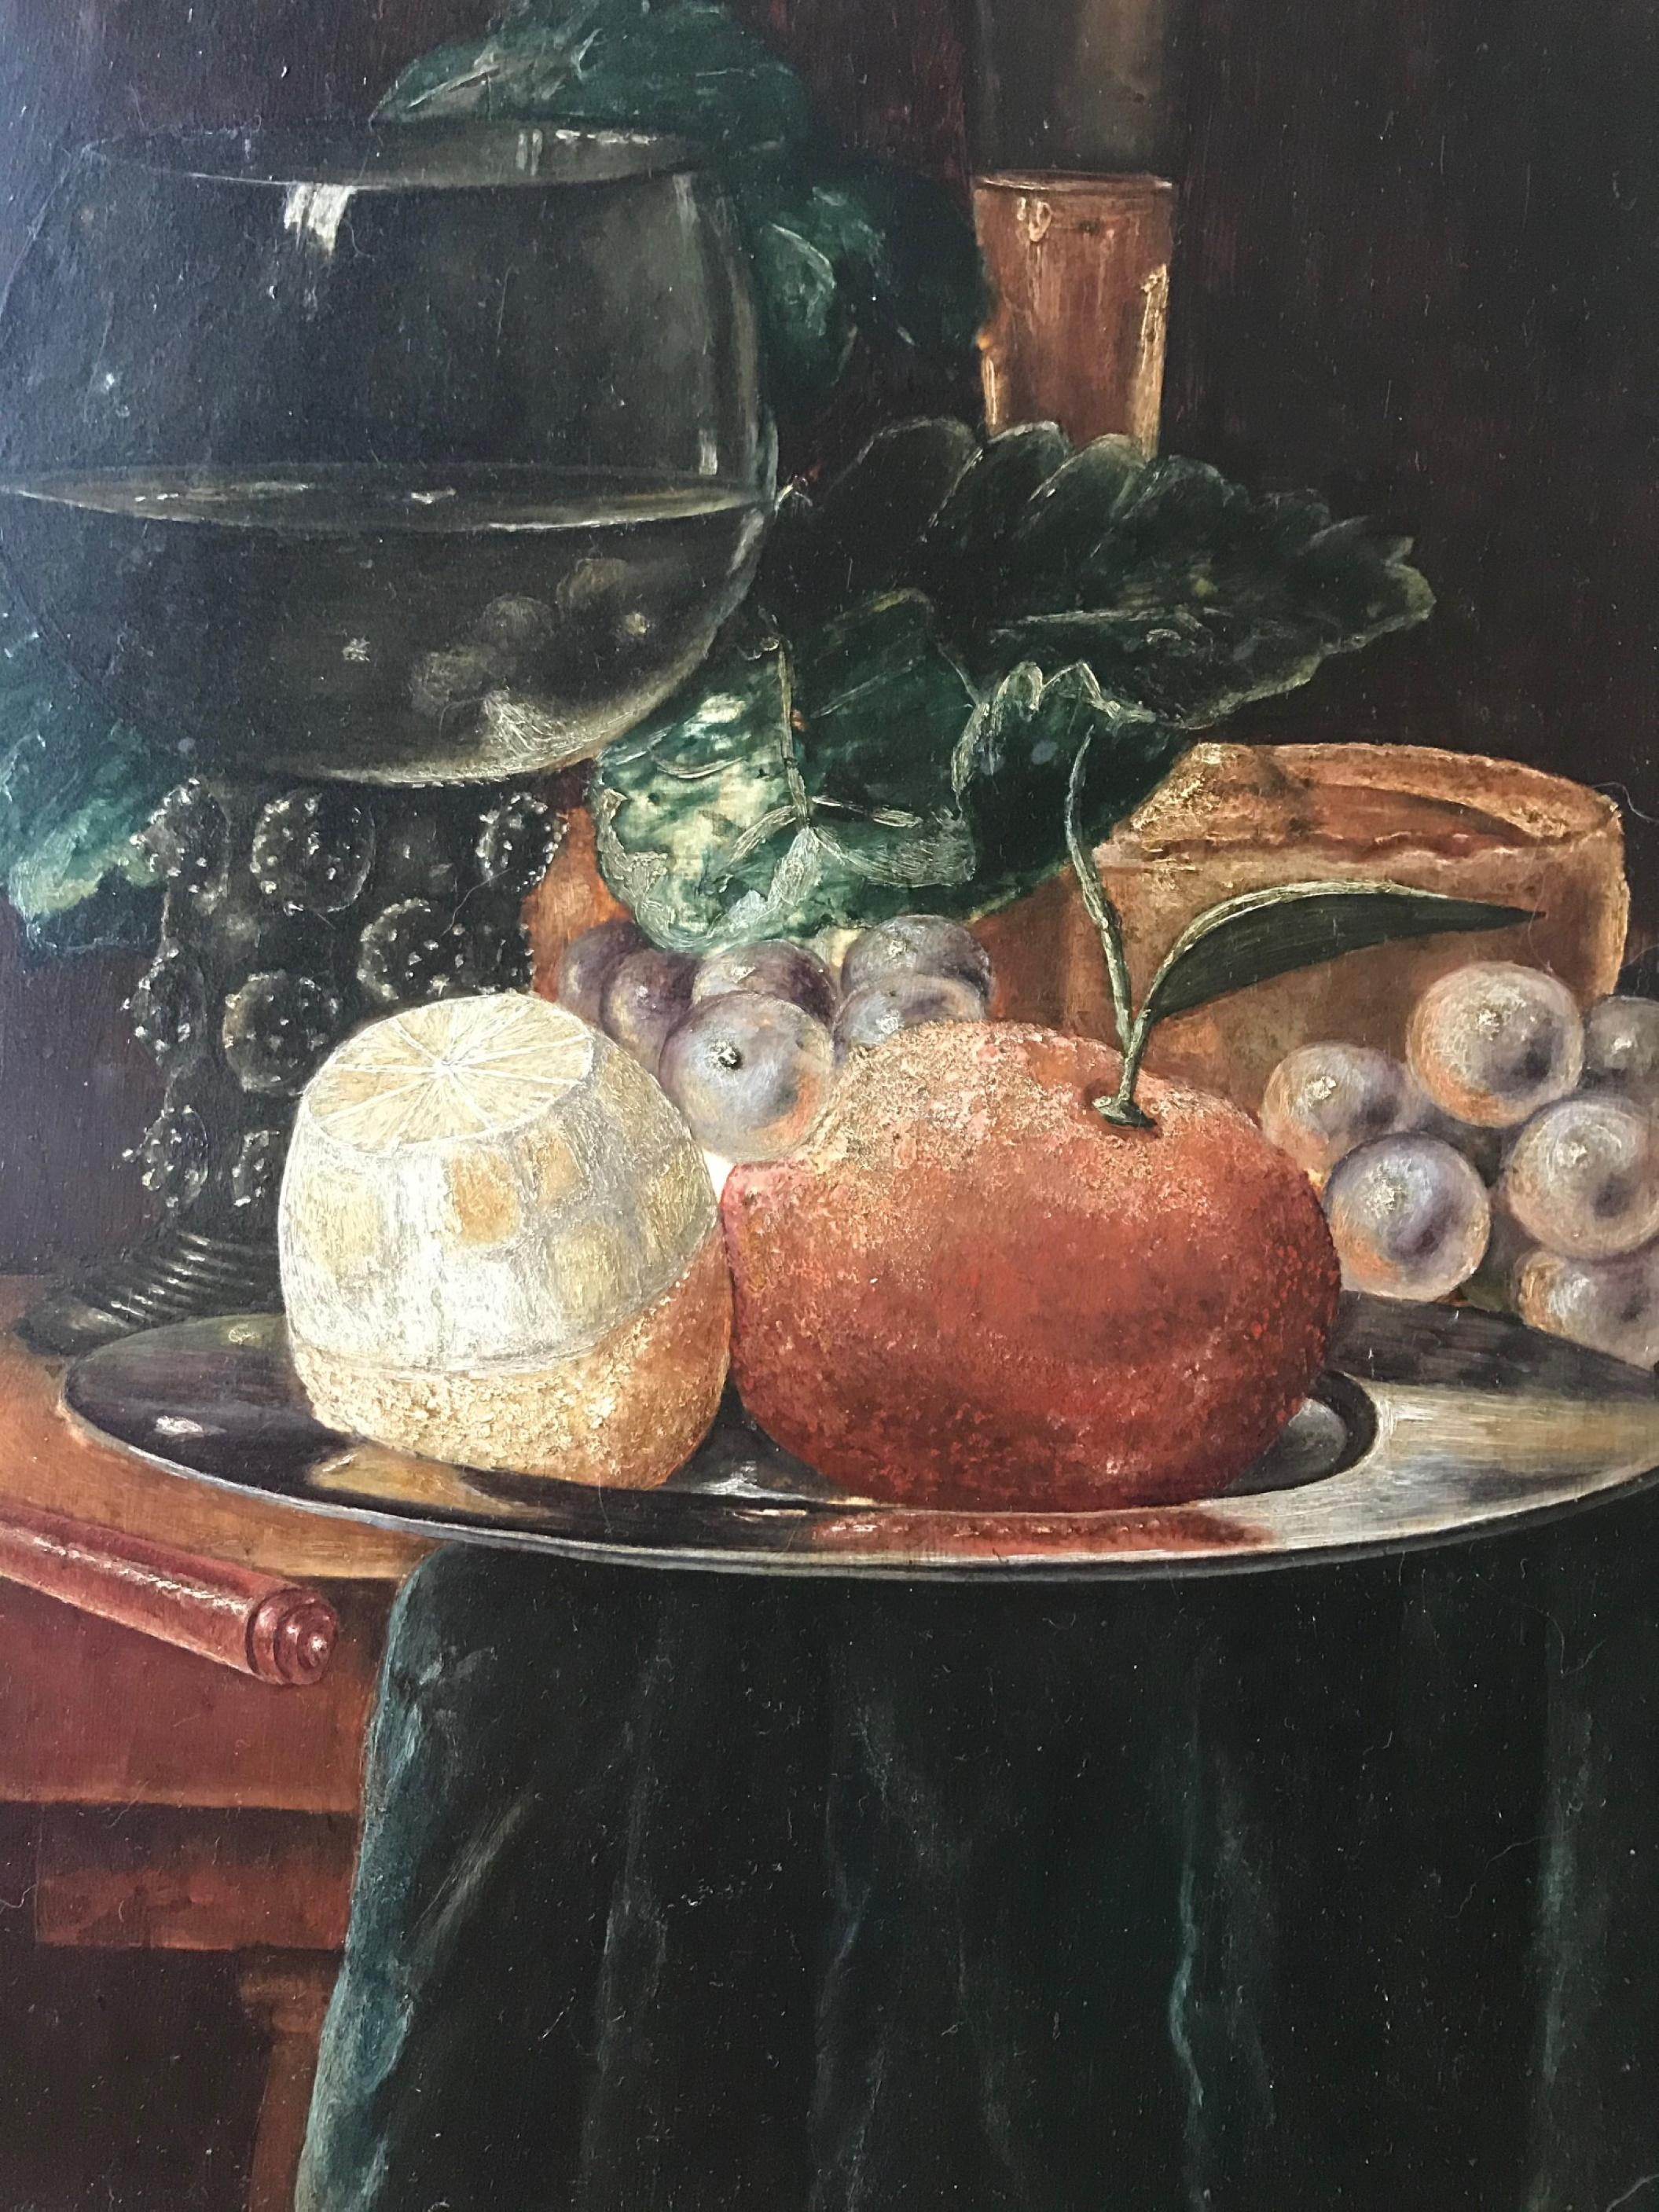 19th century still life painting after Pieter Claesz (1597-1660) Dutch.

This outstanding 19th century oil painting on copper shows an amazing intuitive understanding of the art of the Dutch master, Pieter Claesz. The lavish still life, with the